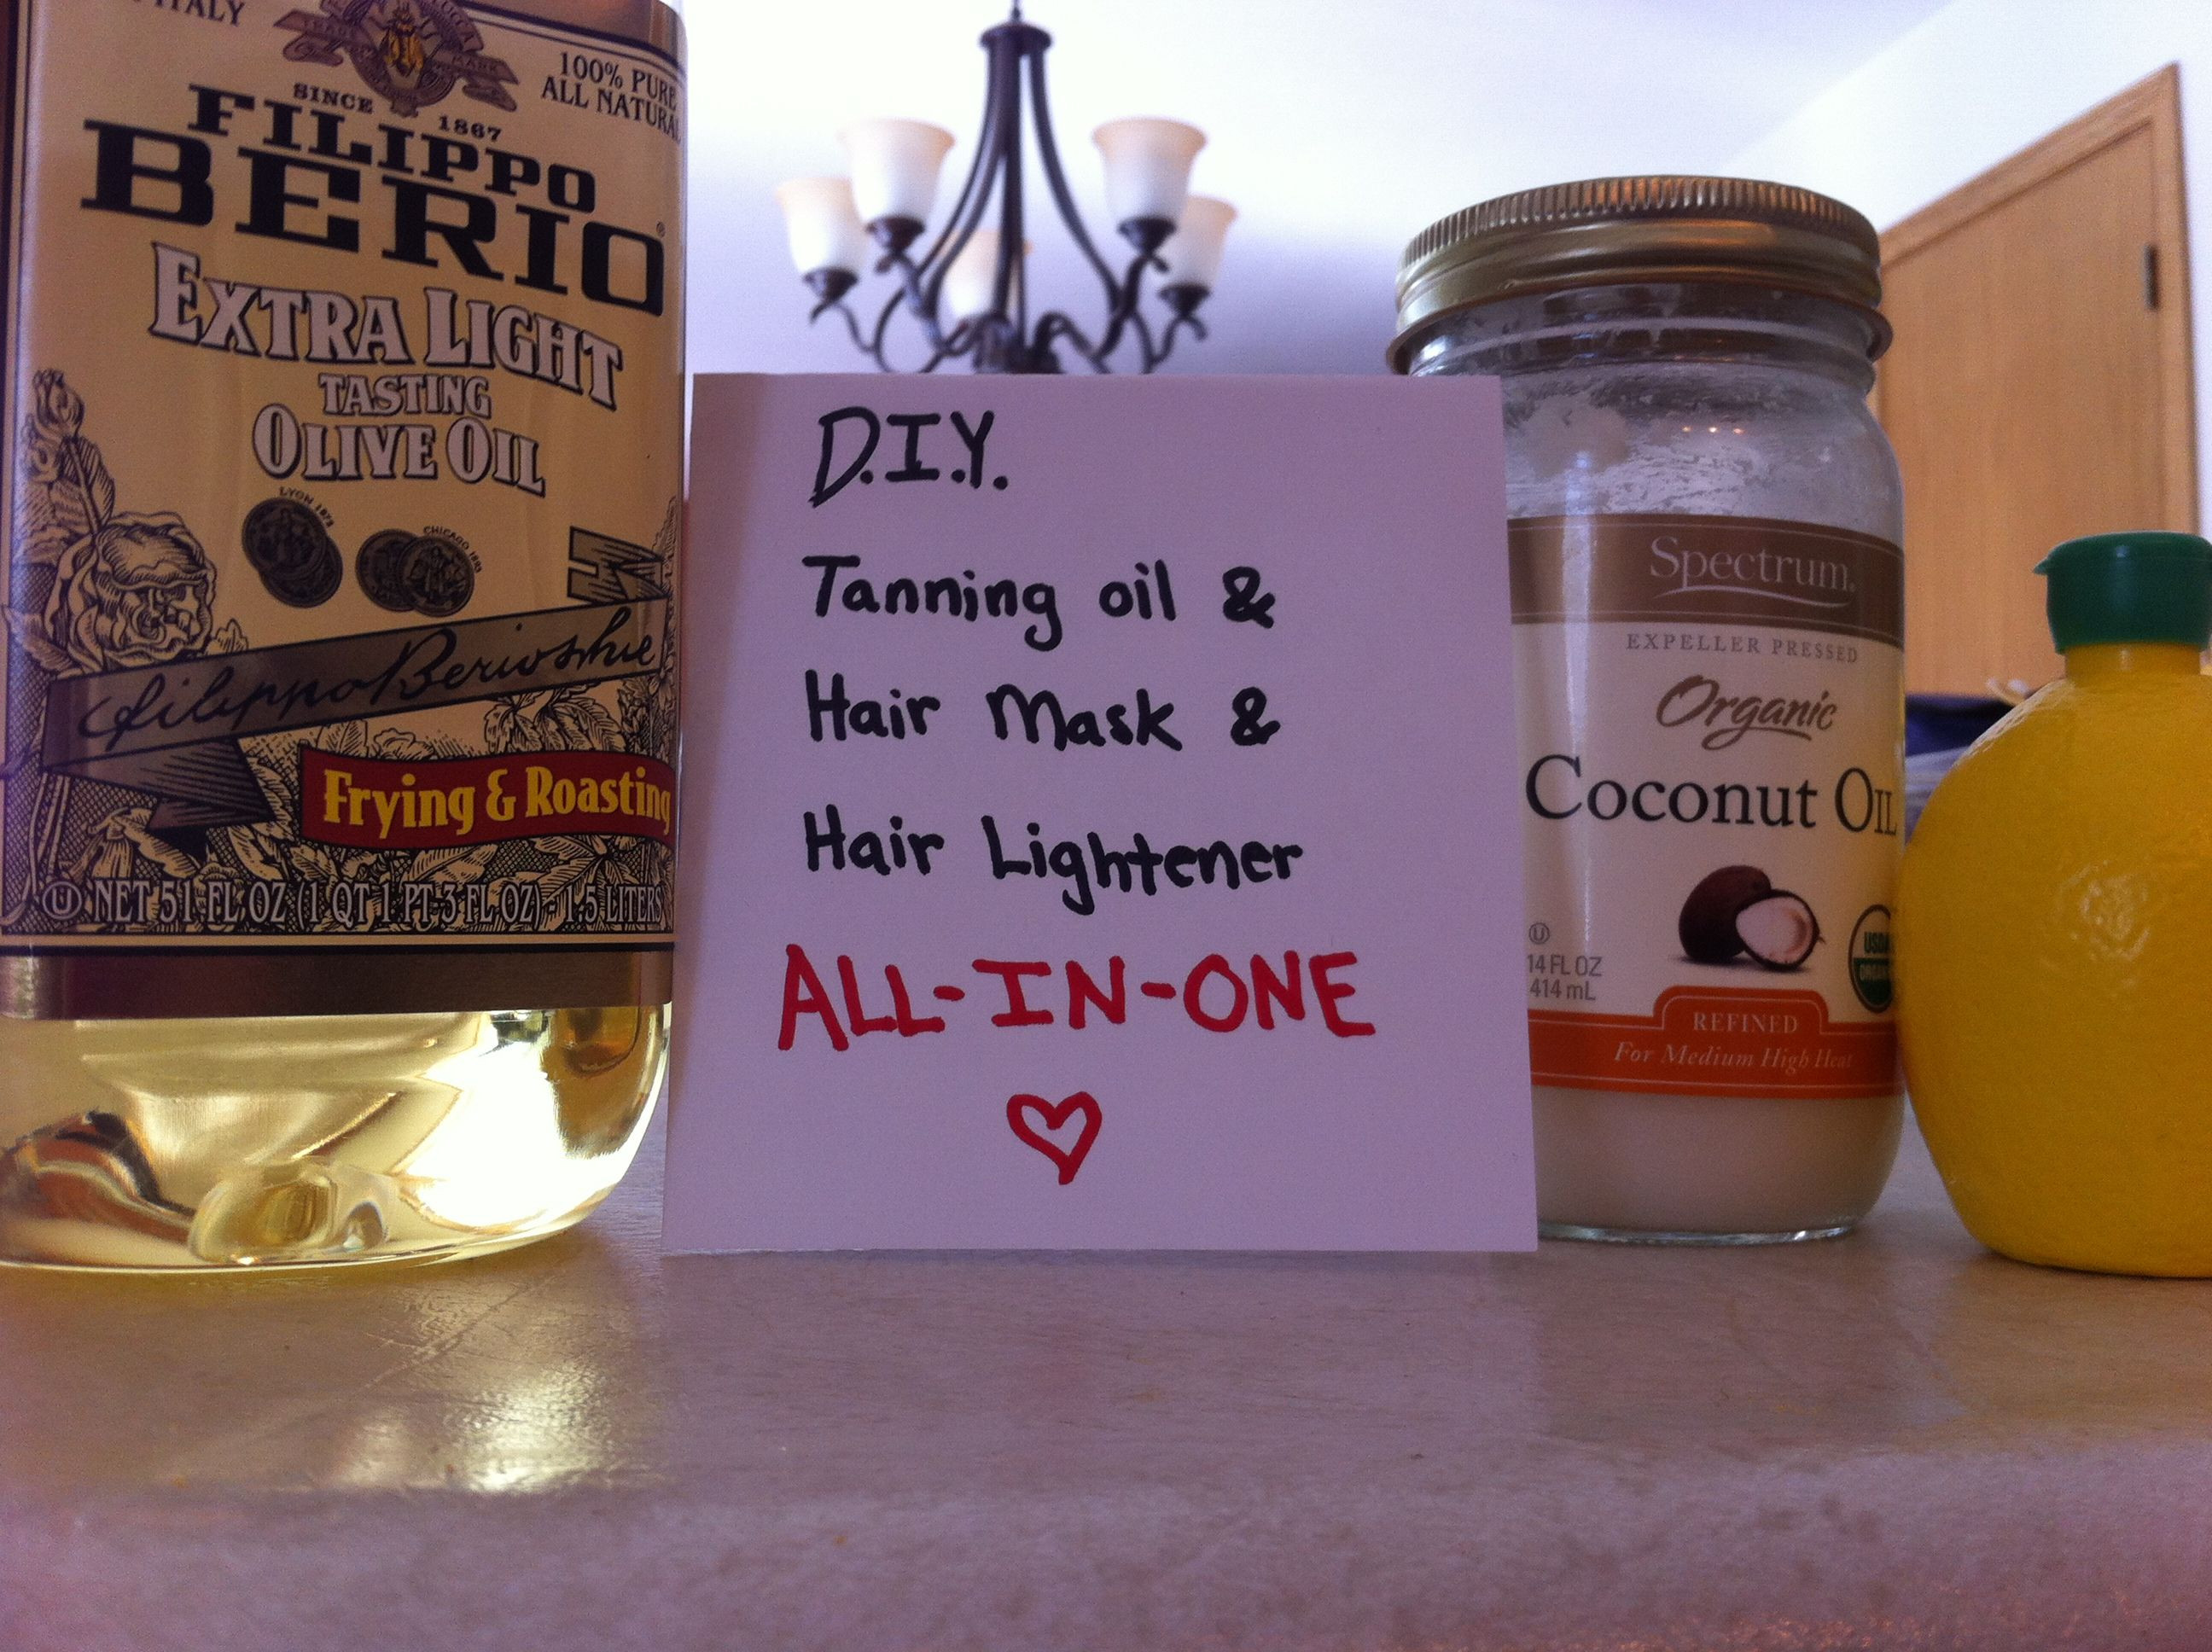 Best ideas about DIY Tanning Oil
. Save or Pin DIY 1 Tanning oil 2 Hair mask 3 Hair lightener Now.